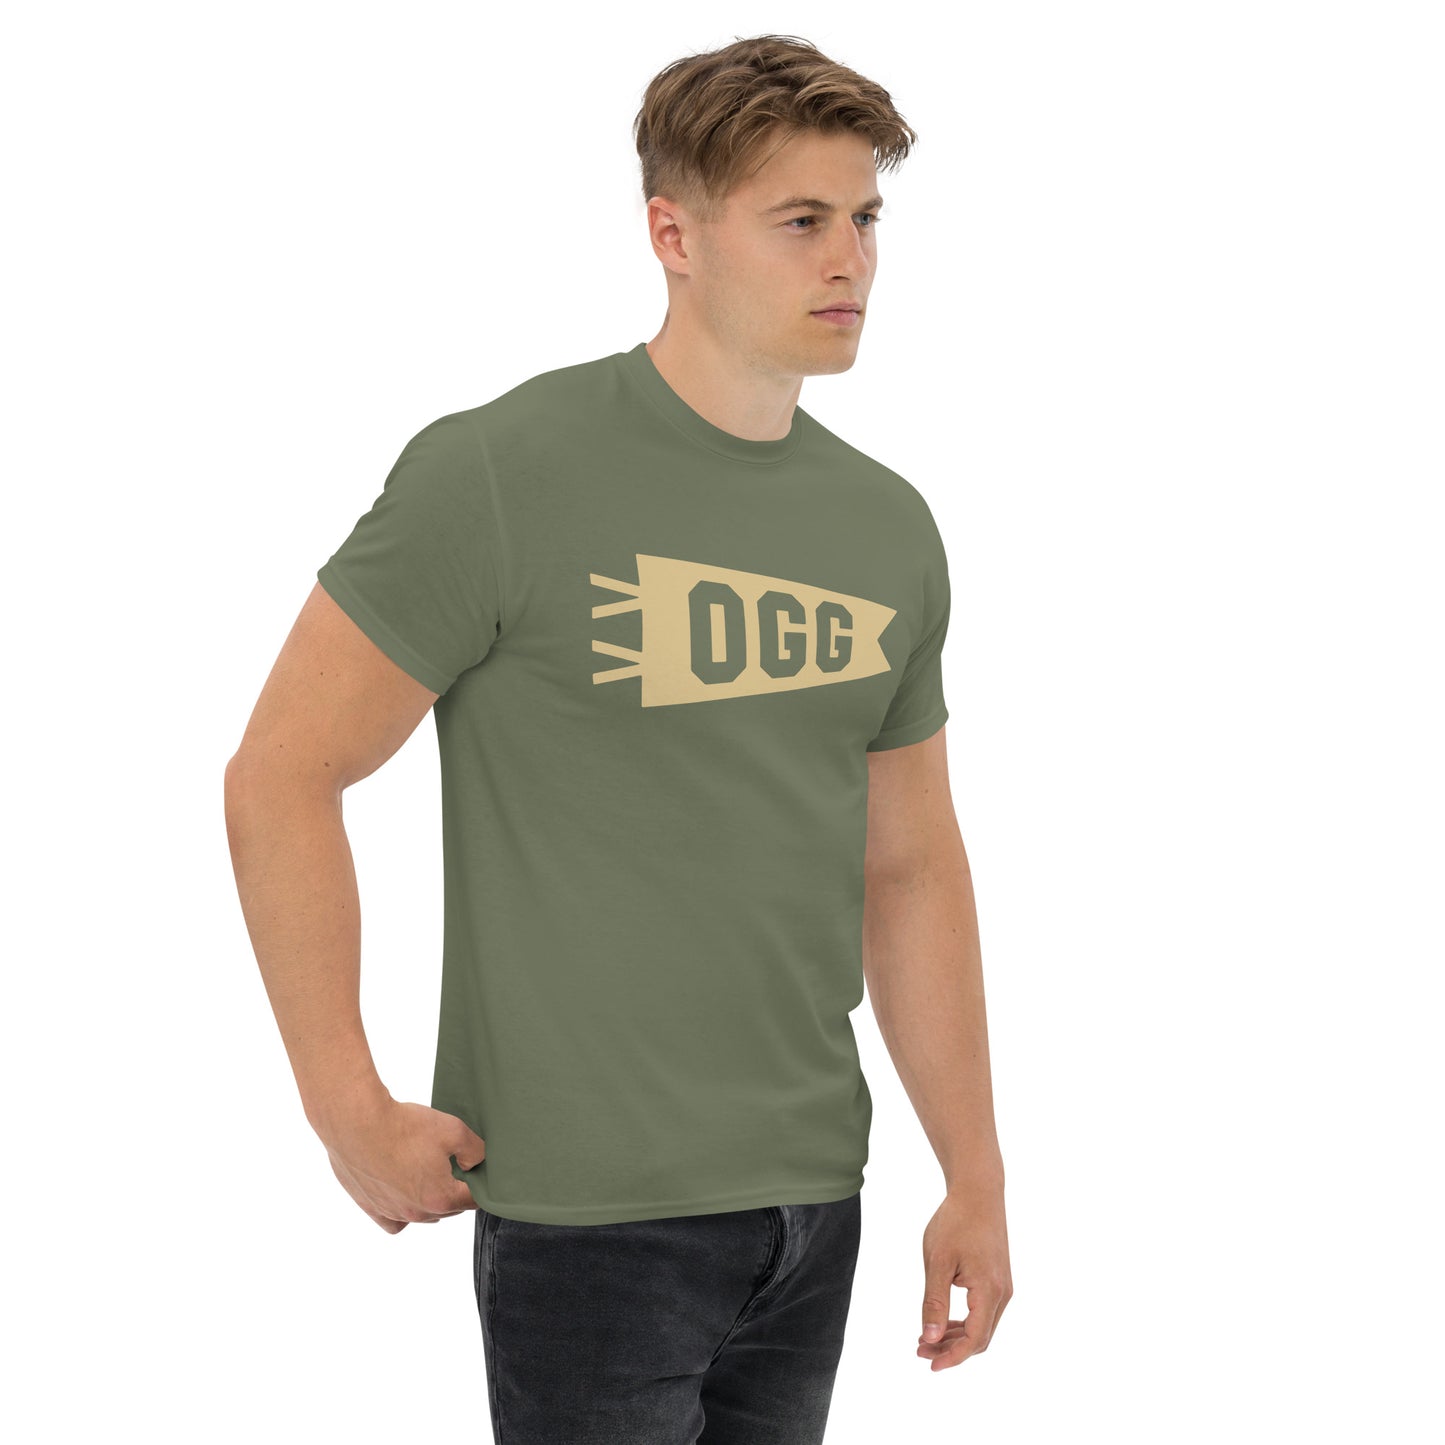 Airport Code Men's T-Shirt - Brown Graphic • OGG Maui • YHM Designs - Image 06